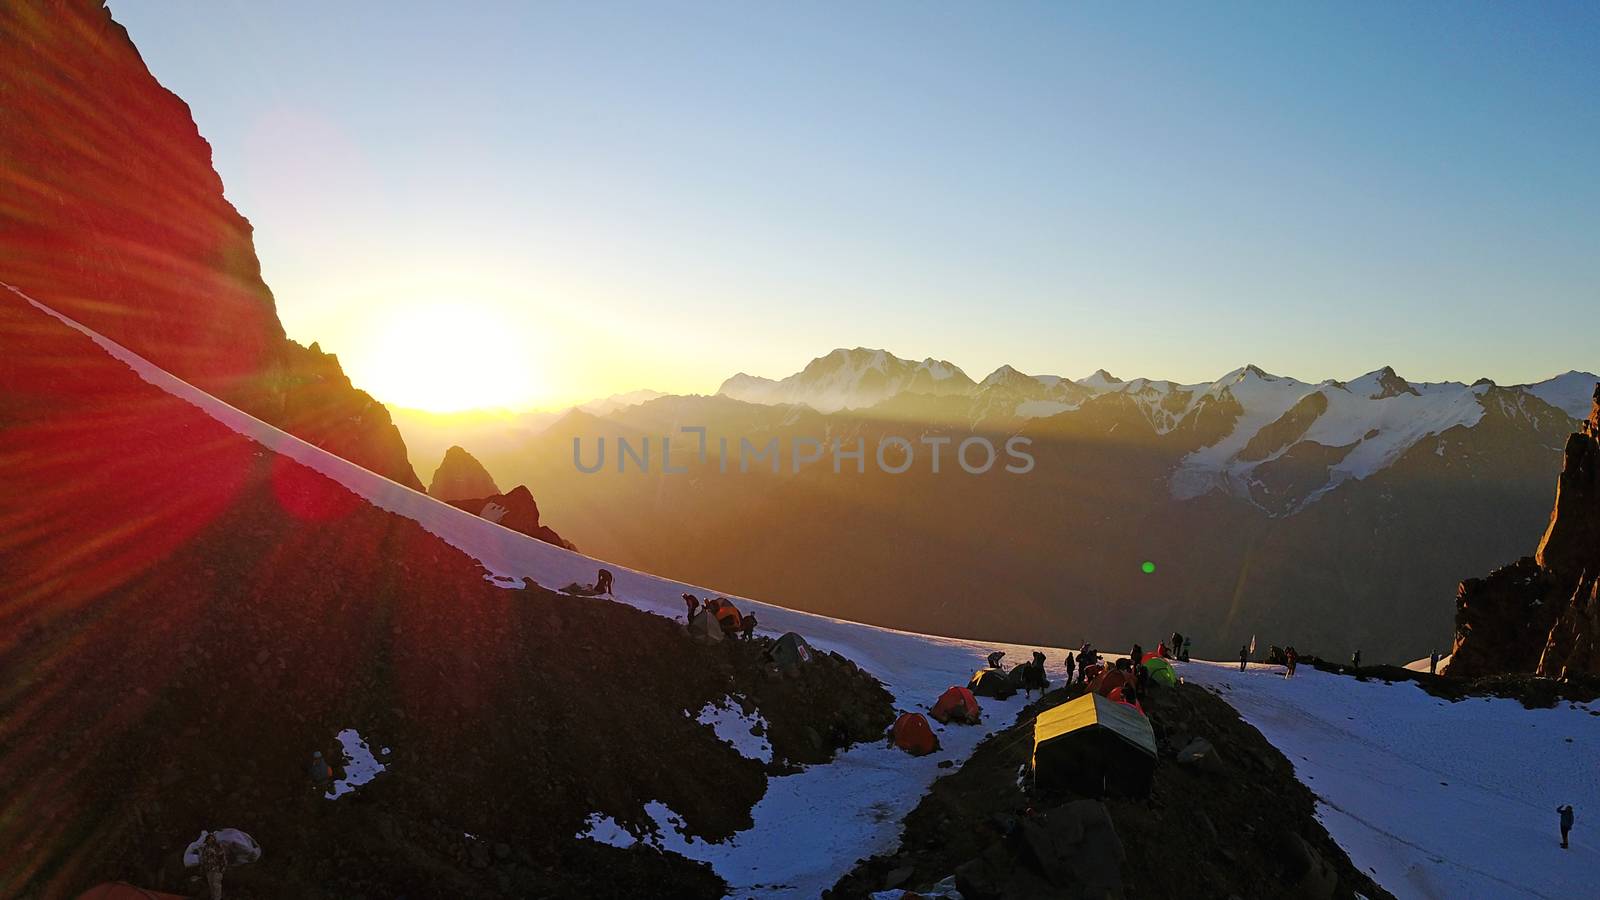 Mountaineering camp high in the snowy mountains. Epic red dawn, top view from a drone. Camp on the edge of the cliff. The snow-capped peaks, huge rocks. Preparing to climb the peak. Lots of tents.